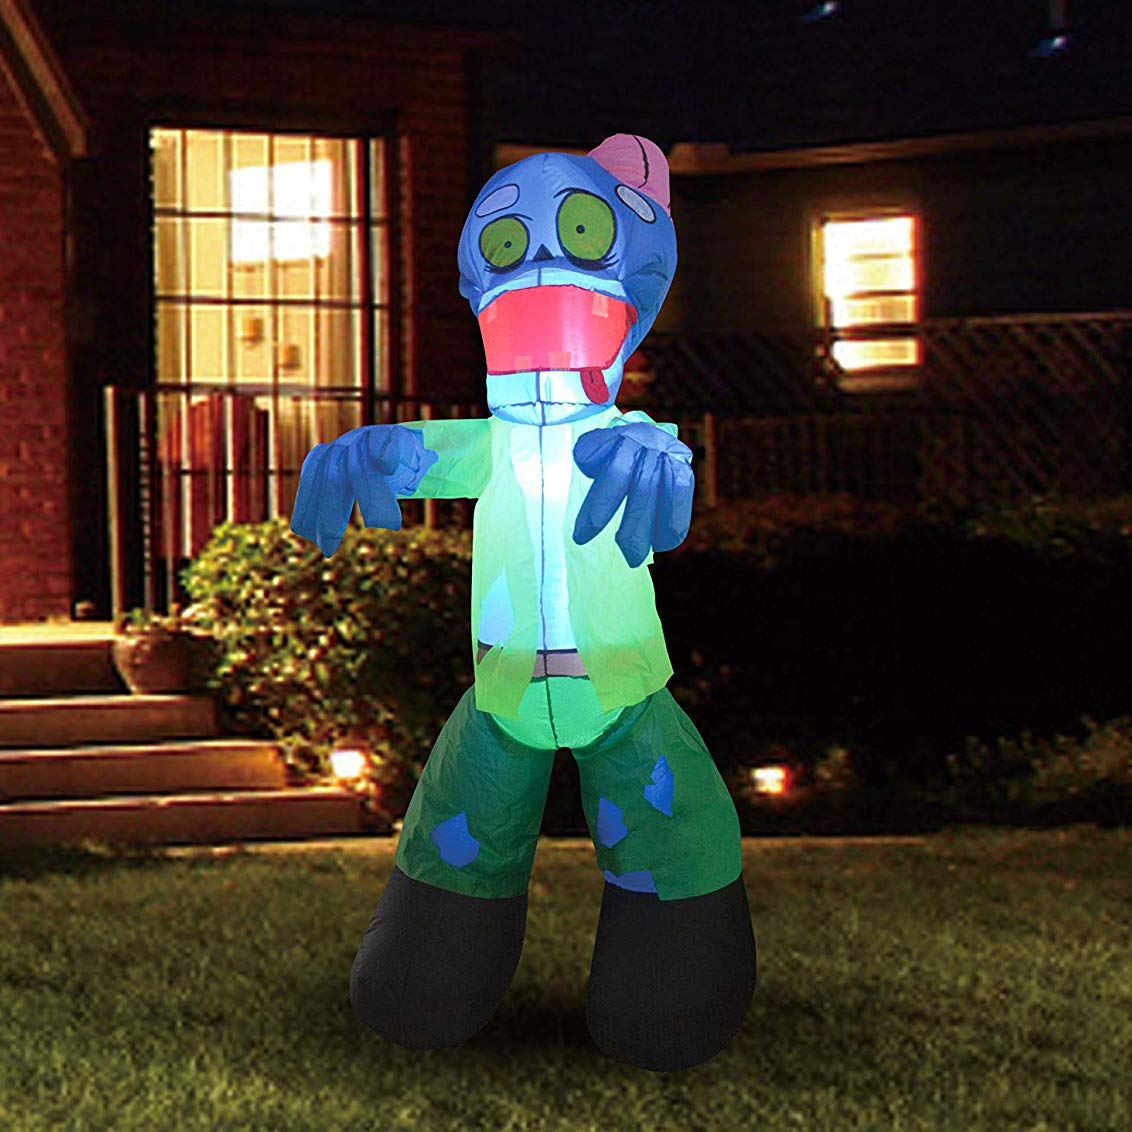 Tall Zombie with Build-in LEDs Blow Up Inflatables (5 Ft)